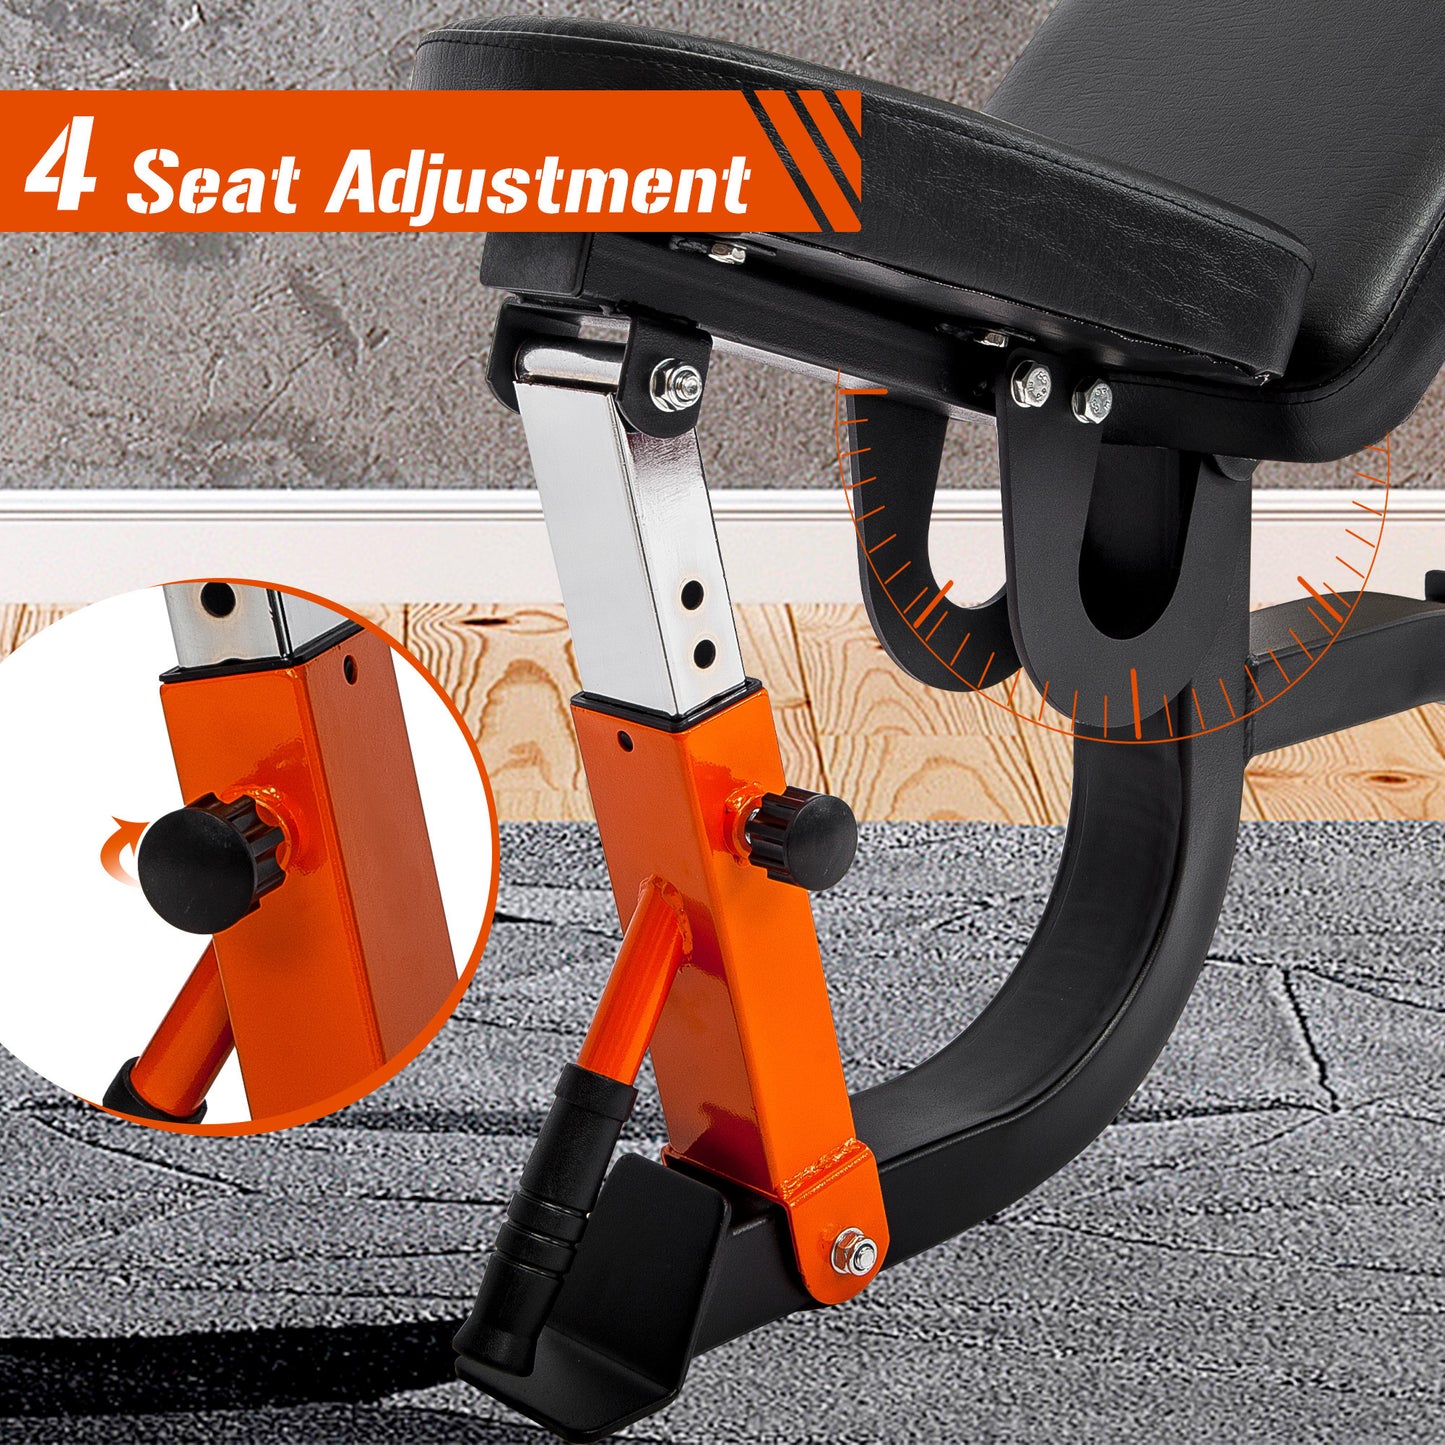 Adjustable Weight Bench - 6 Position Incline Decline Utility Bench with High Density Foam Padding for Home Gym Strength Training [600 LBS Weight Capacity]